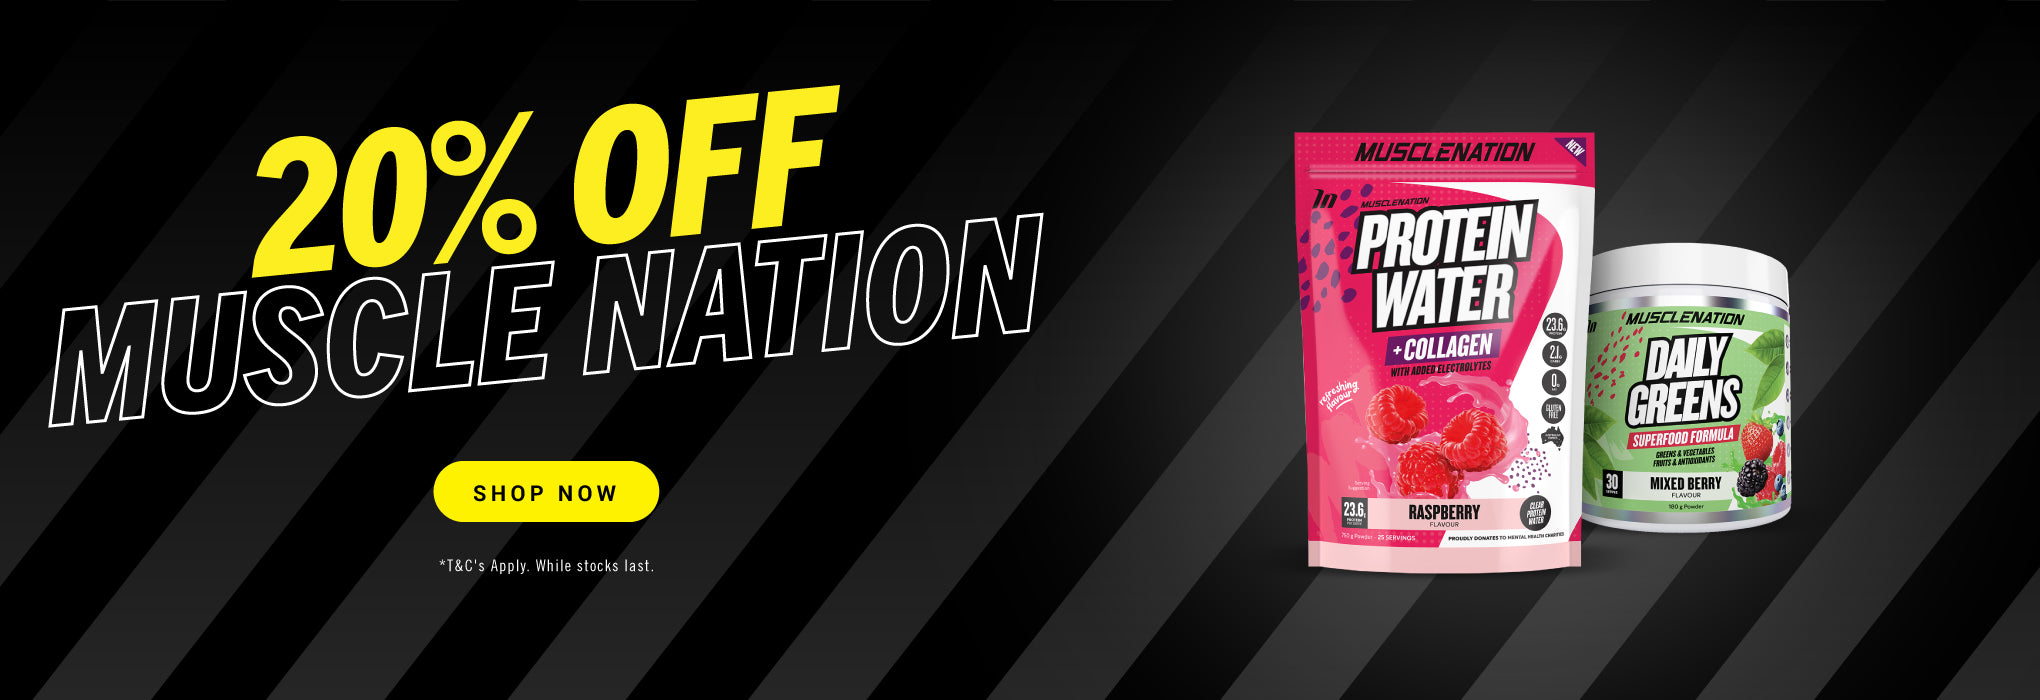 April Fortnightly Deal - 20% OFF MUSCLE NATION